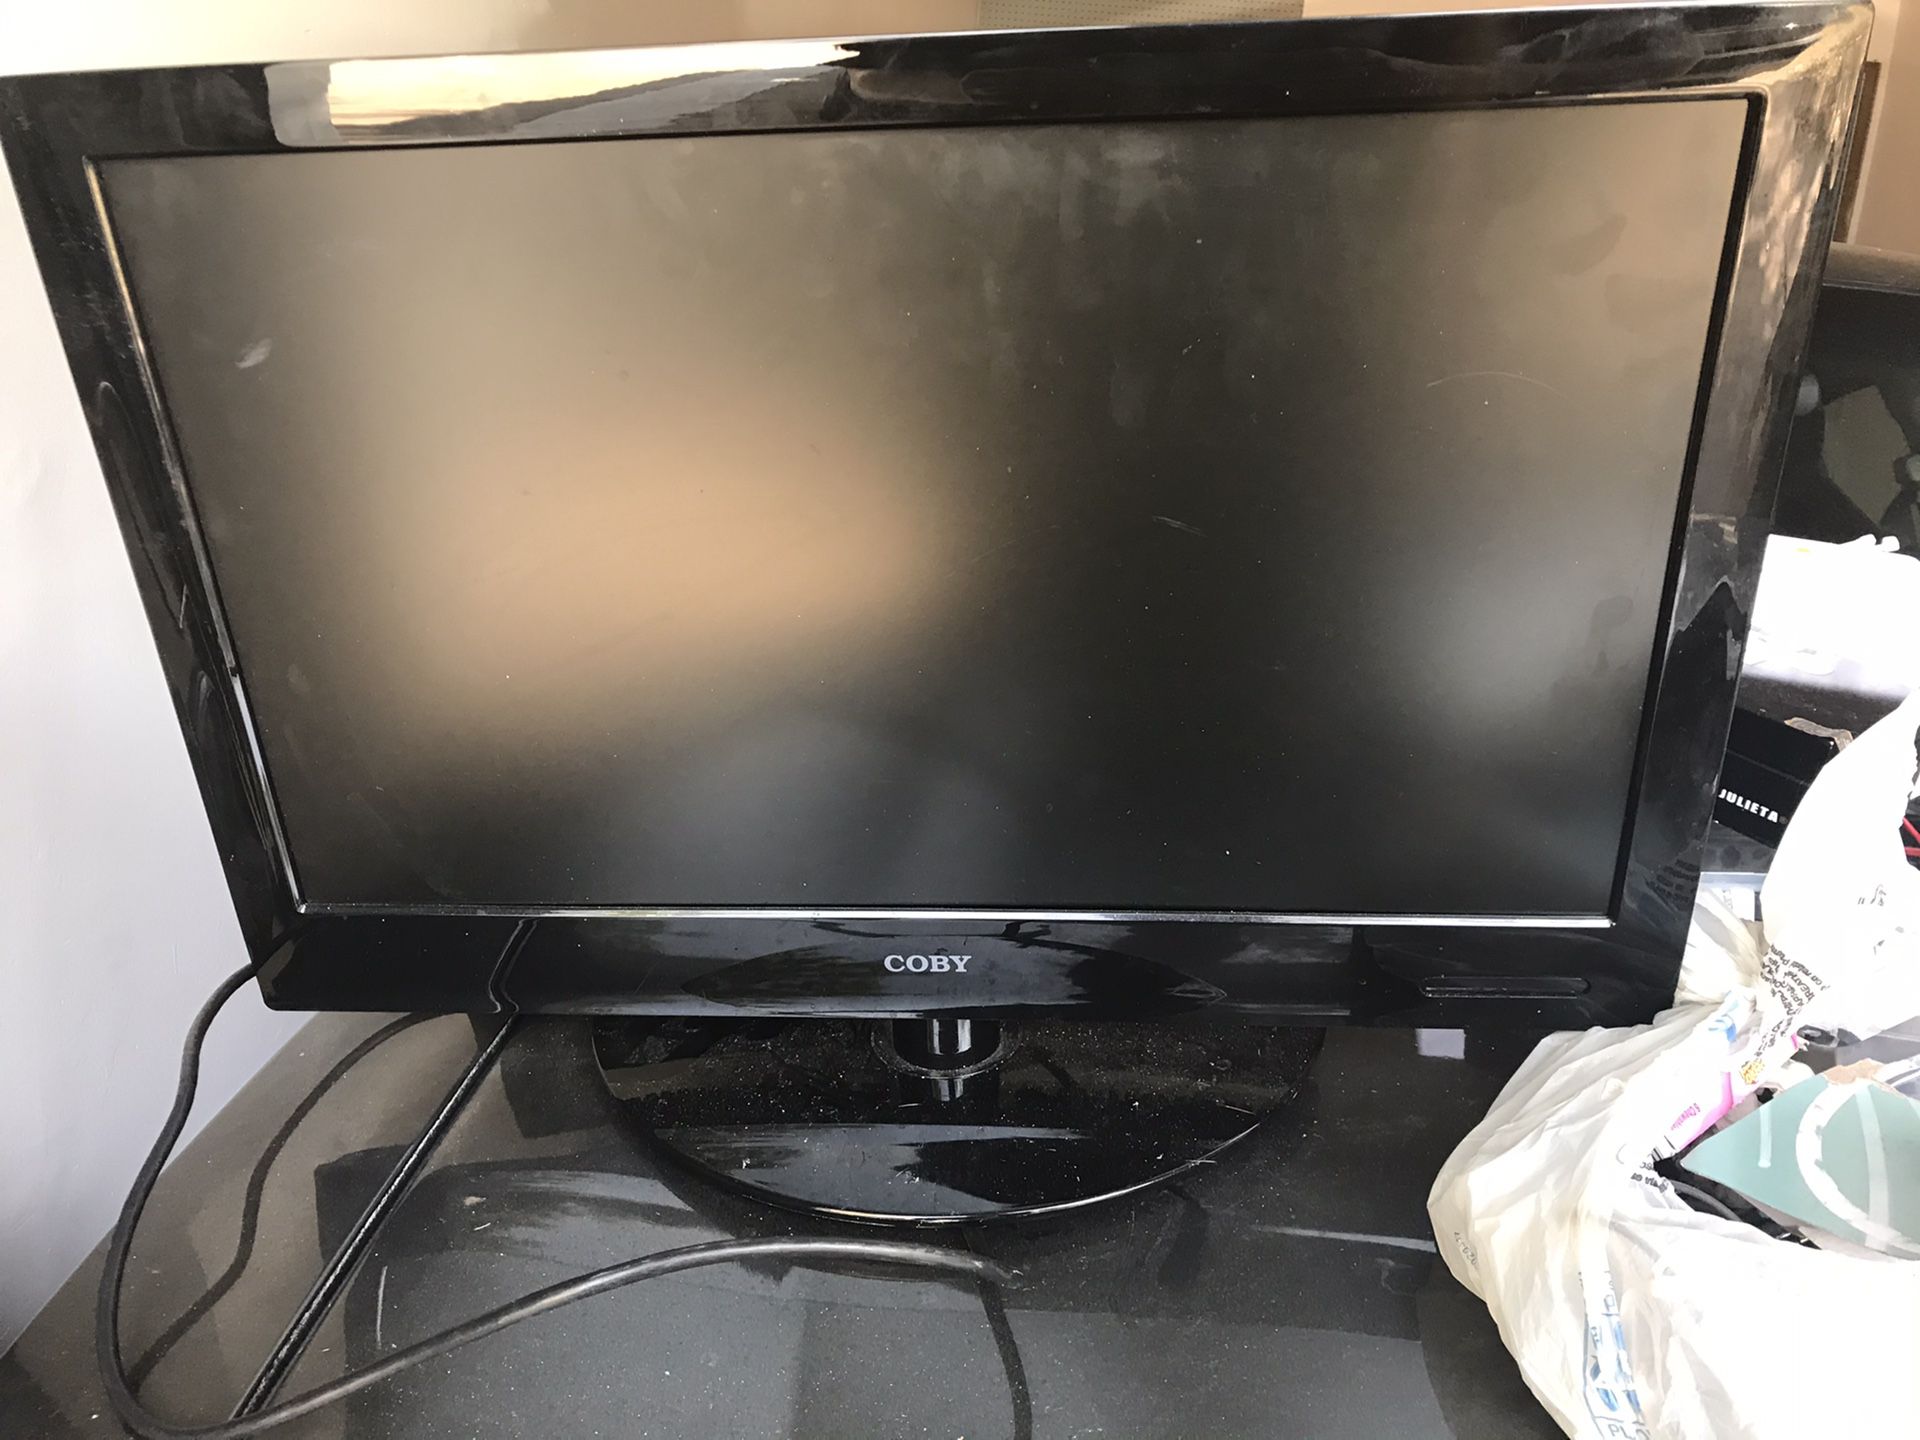 Coby Tv 25 inch